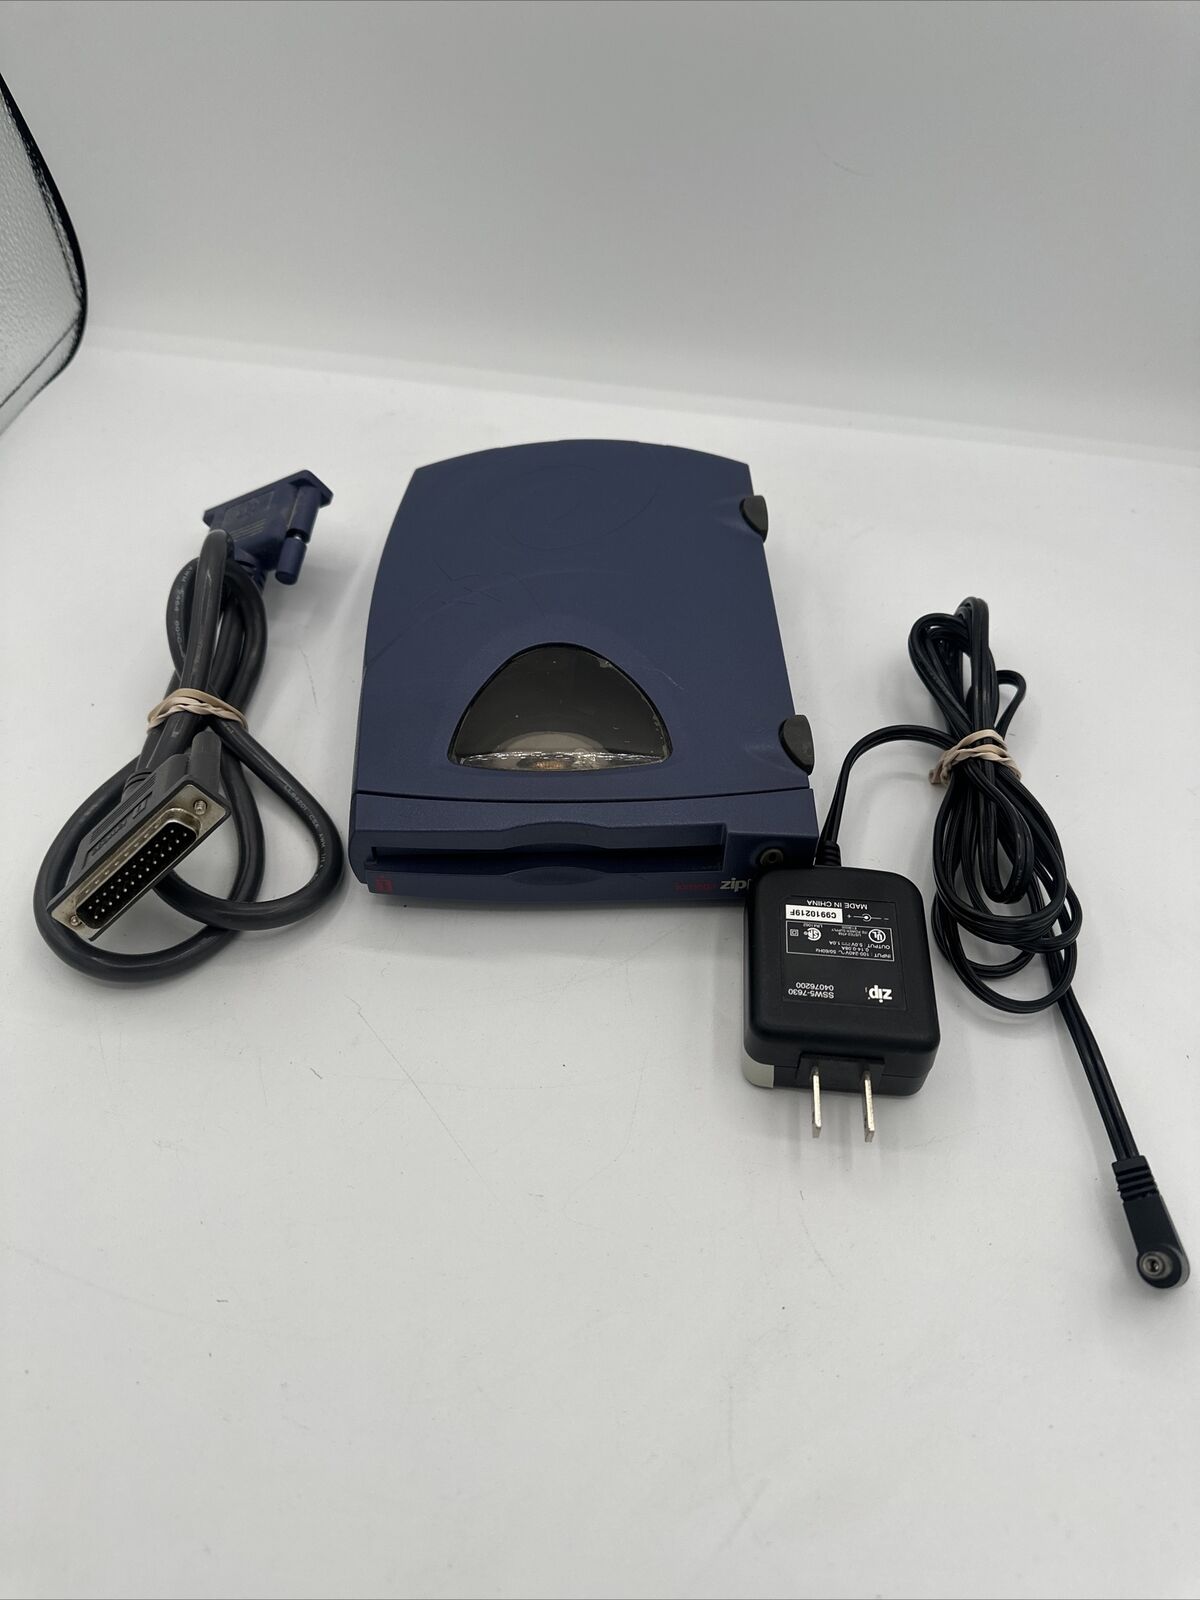 Iomega ZIP 250 External Drive 250MB Z250P w/ Power Supply & Cables | Works